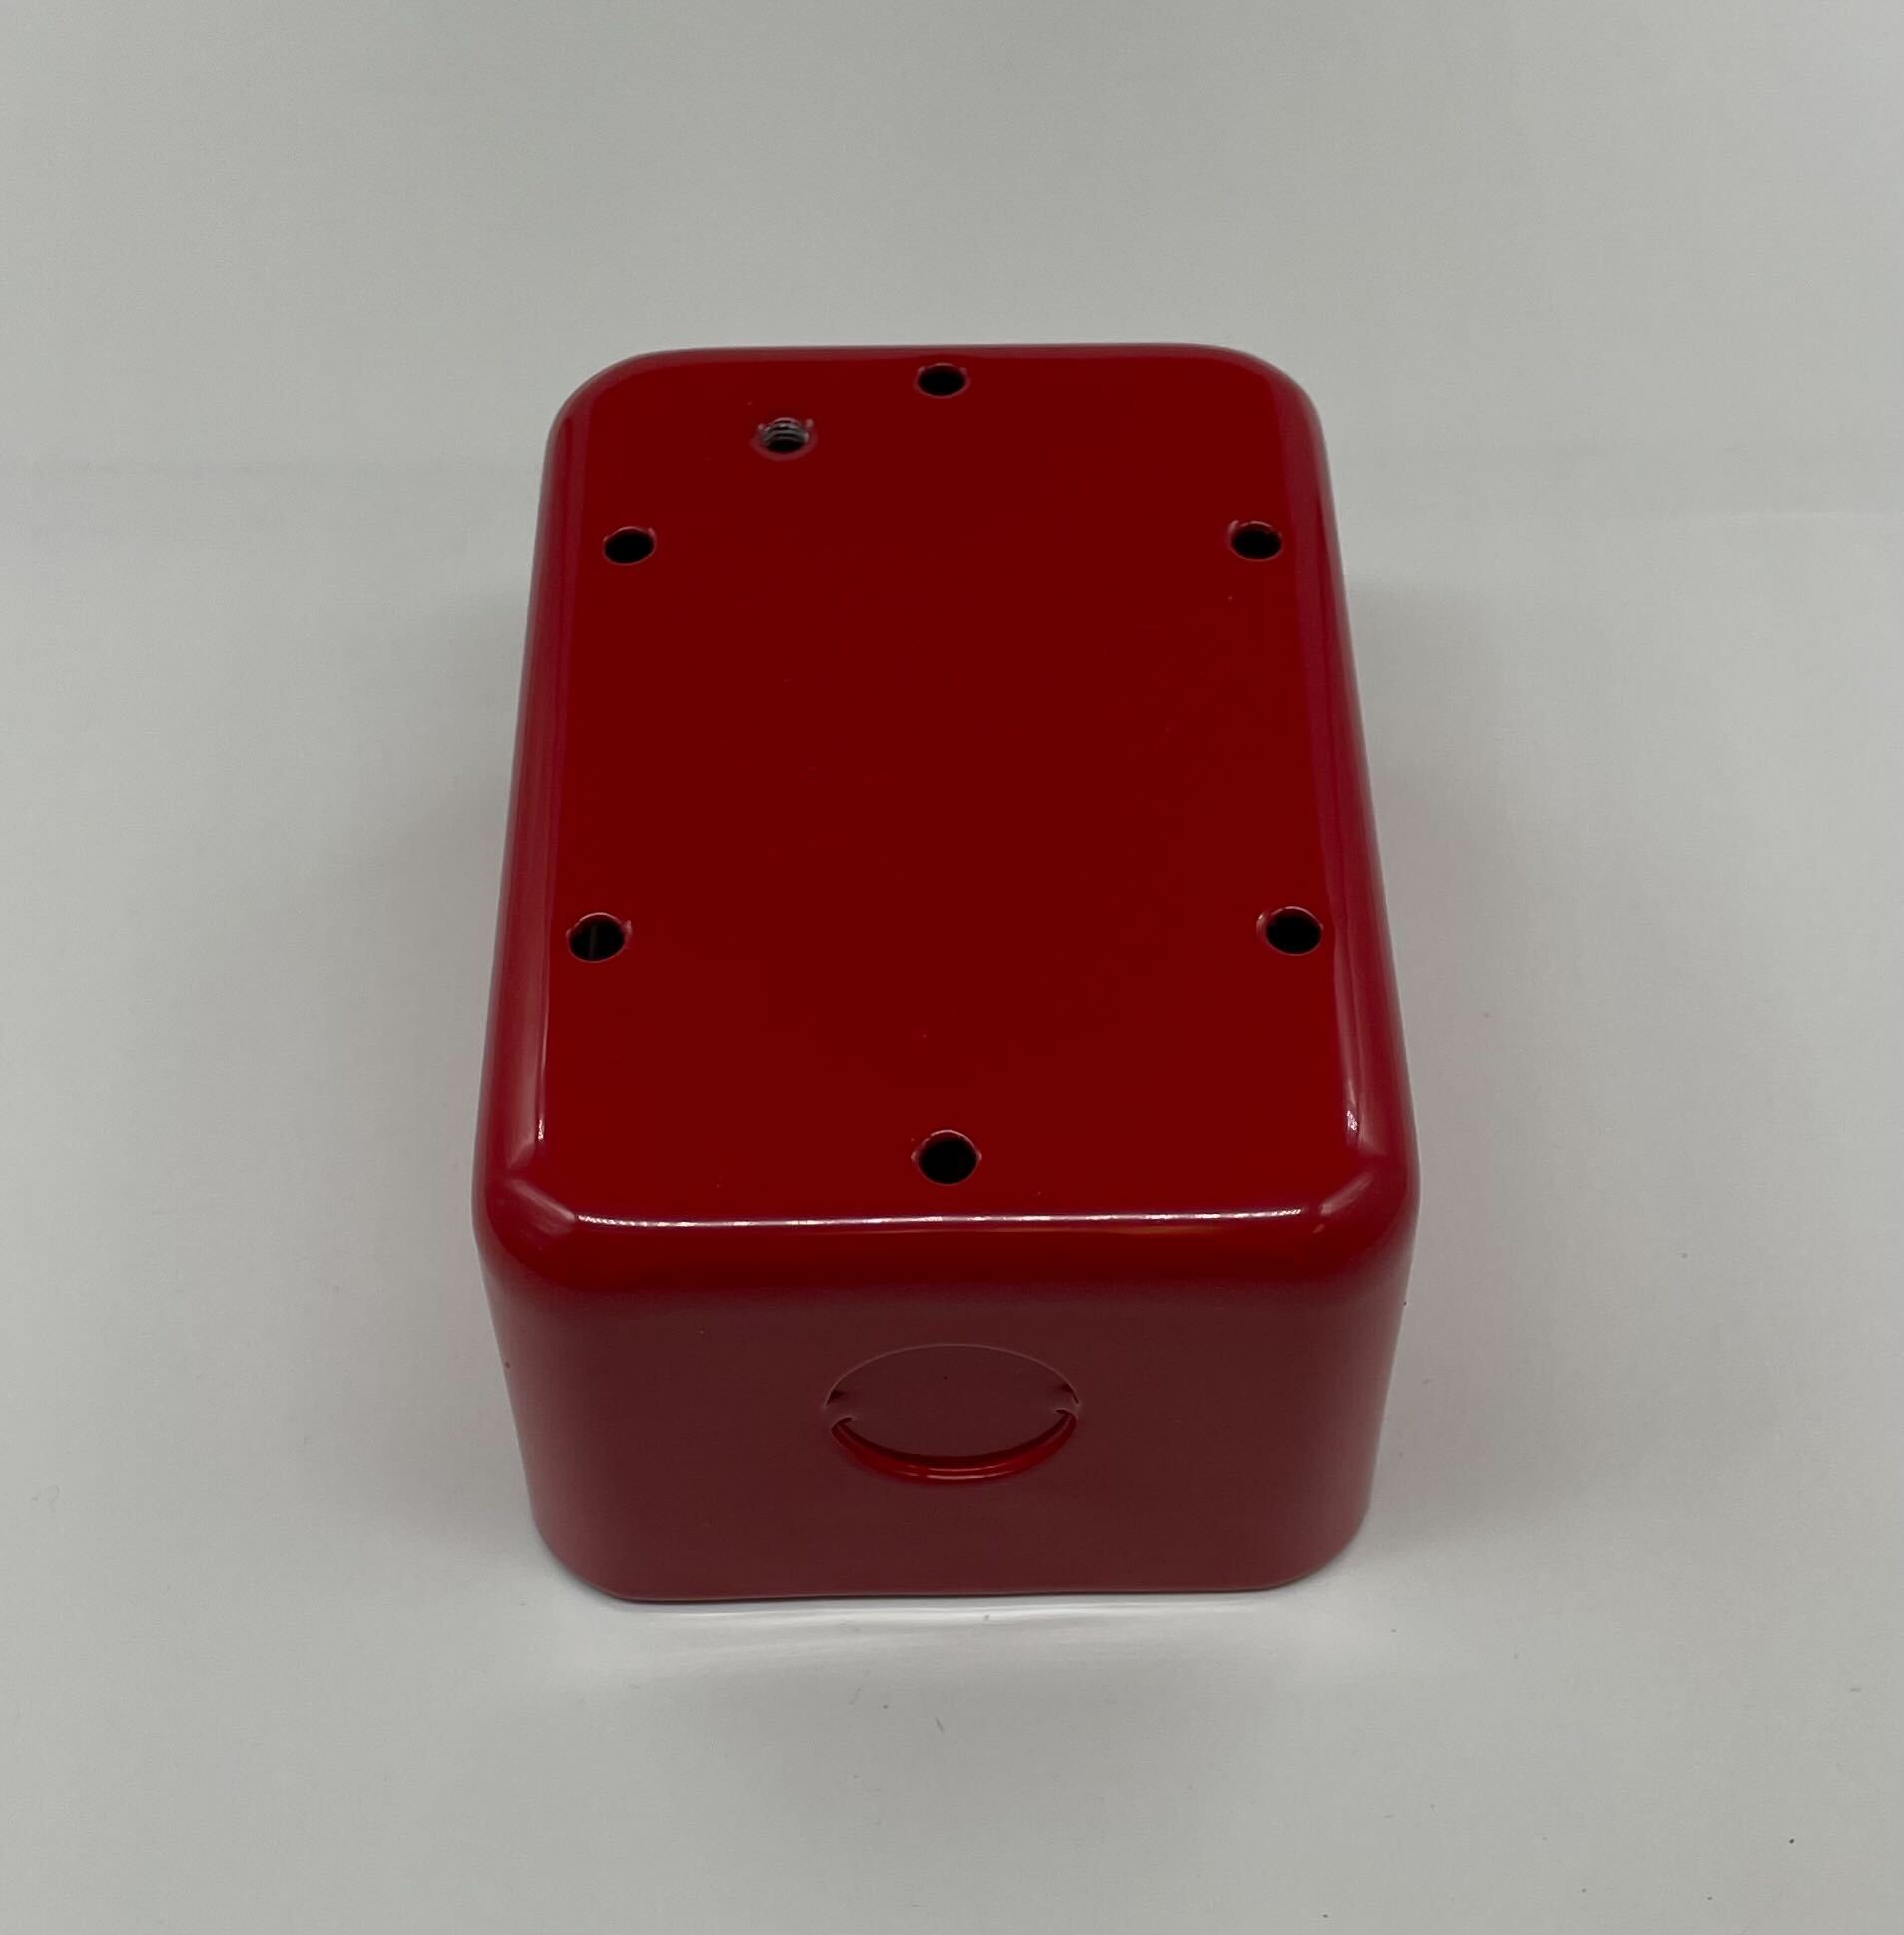 Wheelock MPS-ISB - The Fire Alarm Supplier